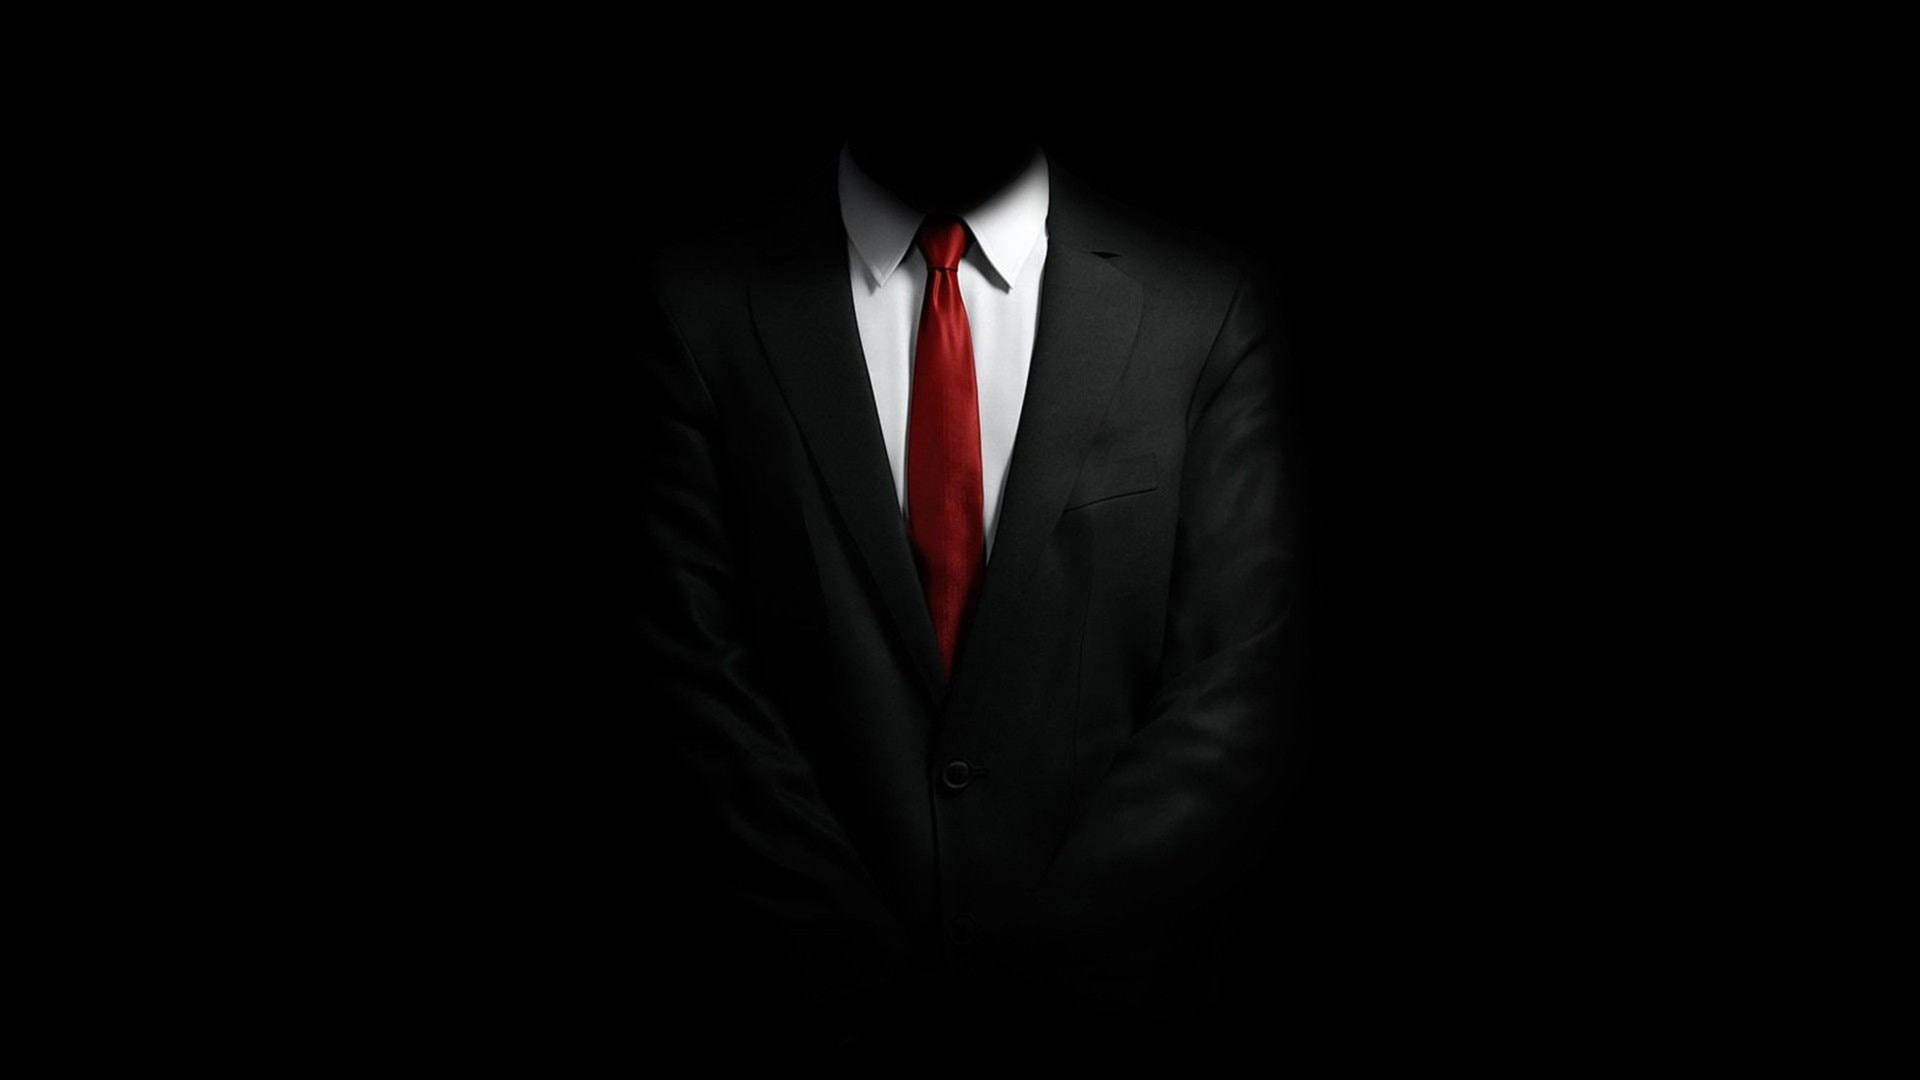 Hitman Full 4k Iconic Suit And Tie Background